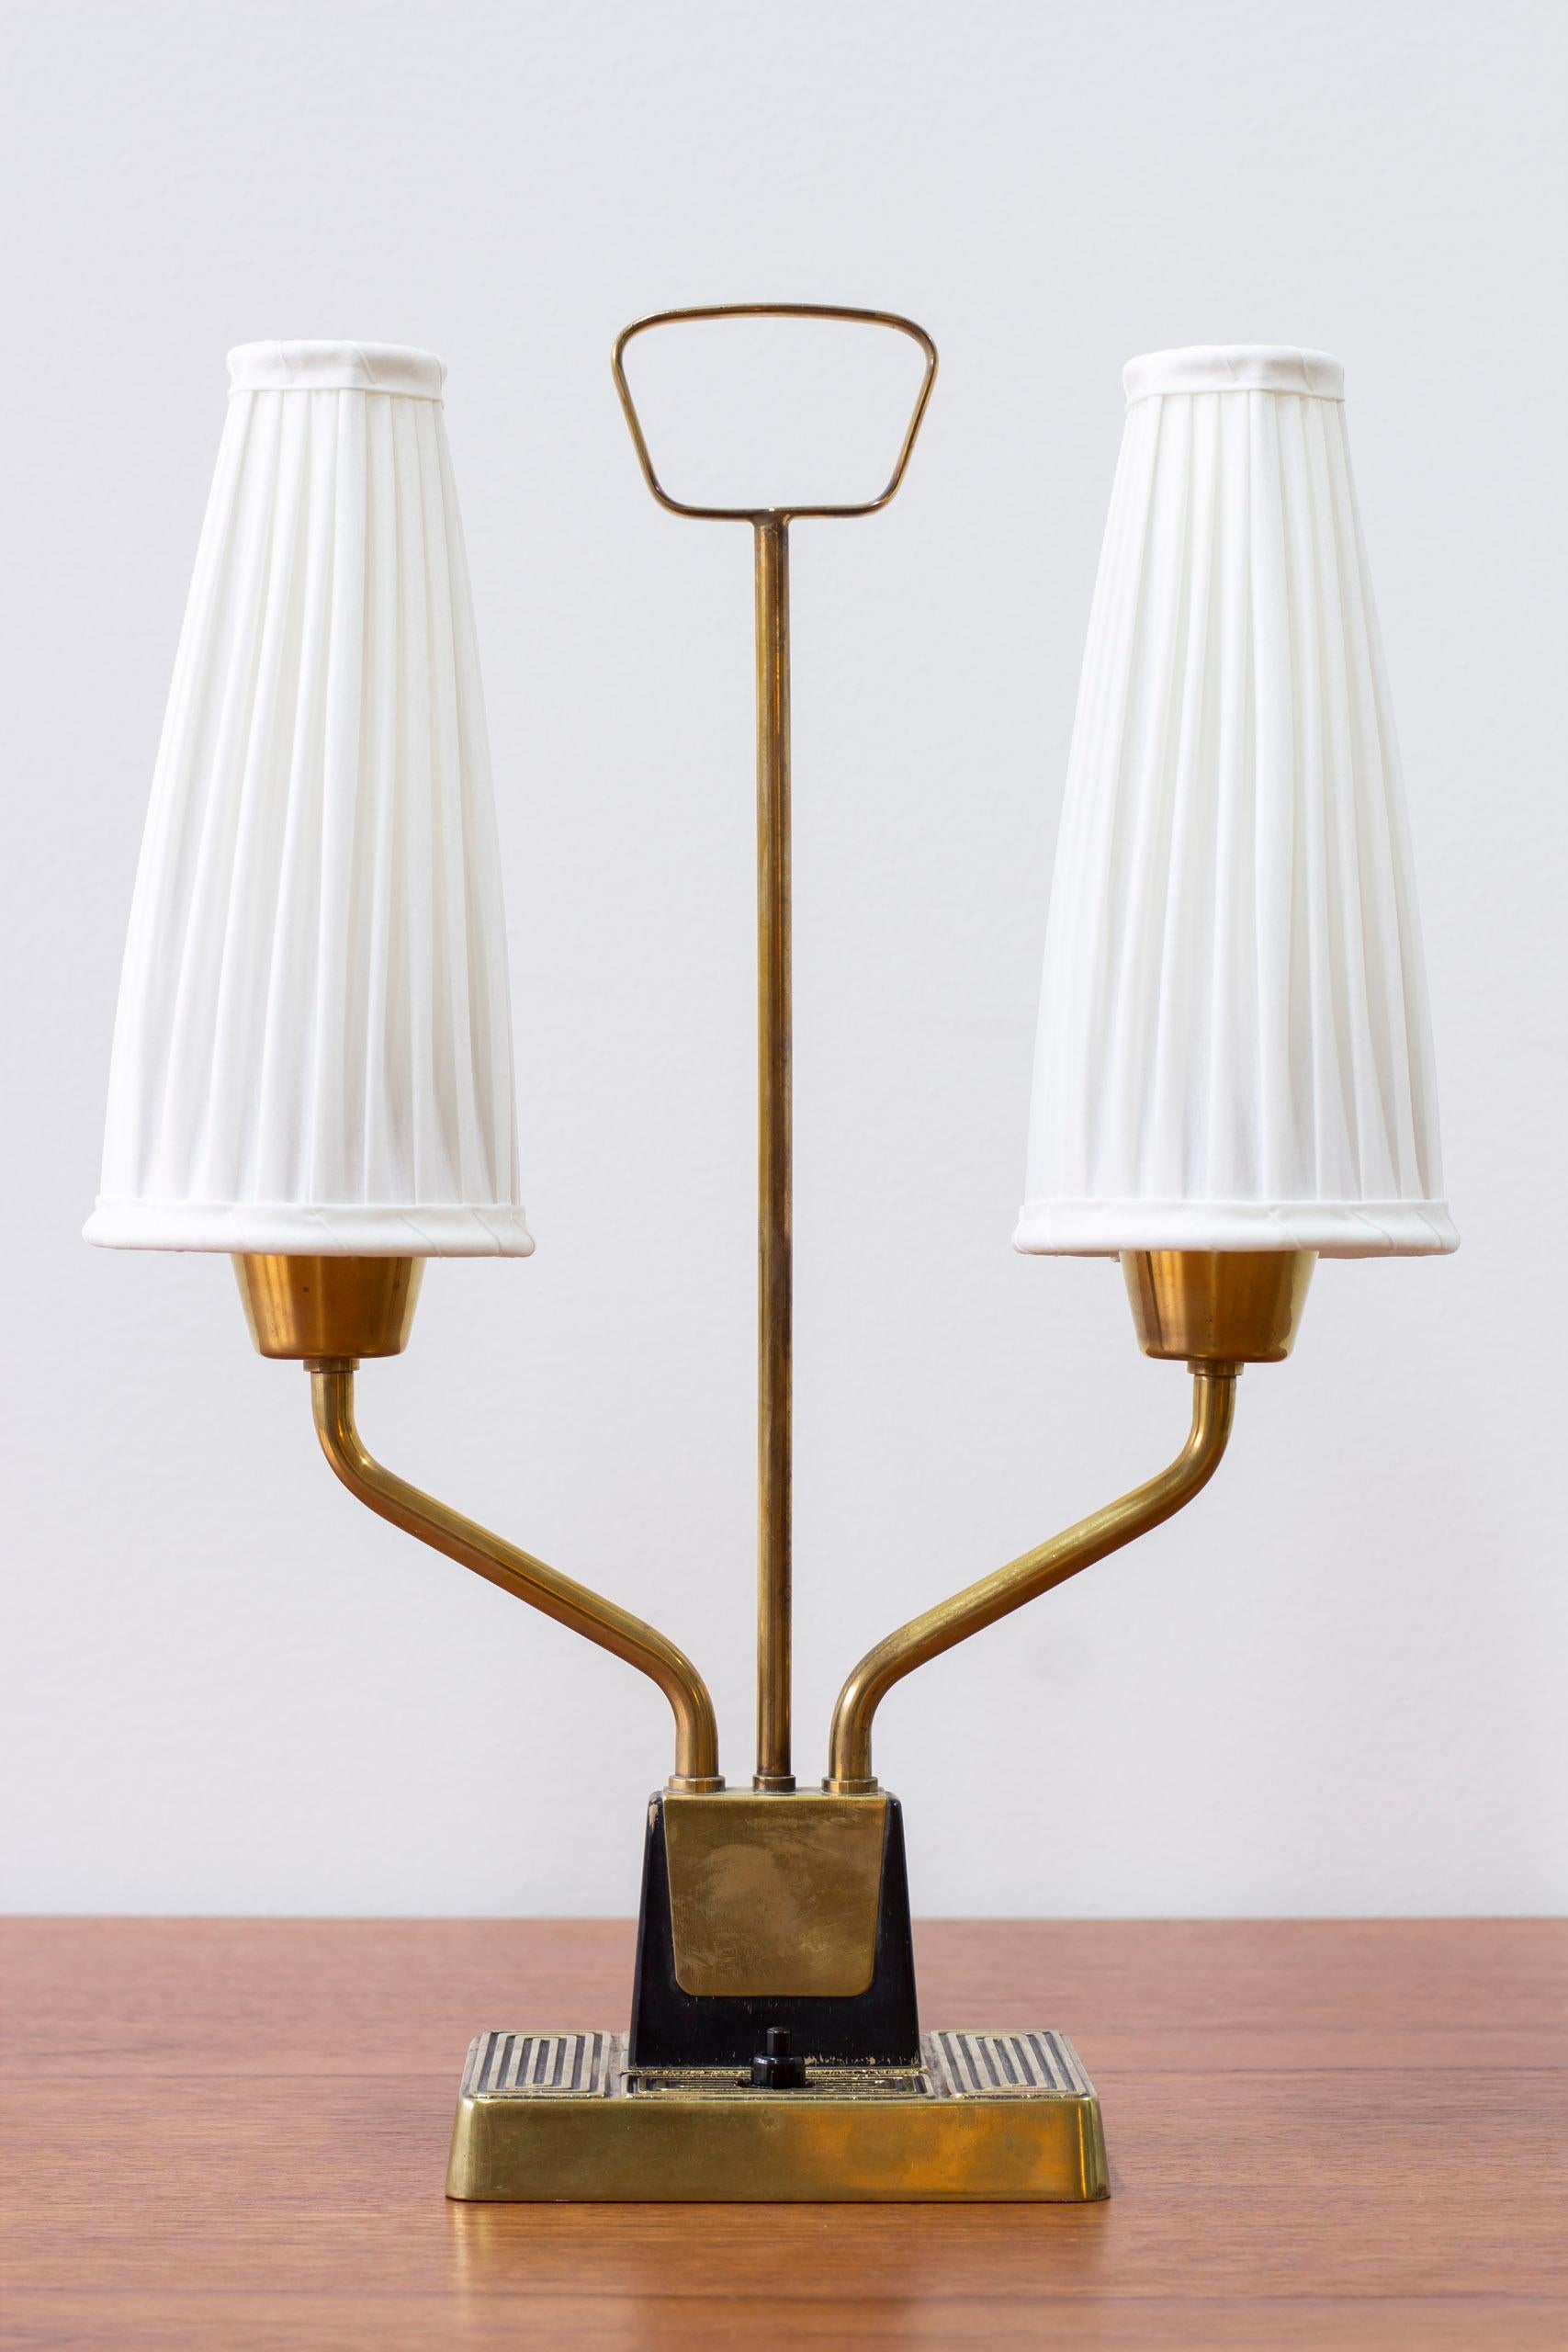 Swedish Brass table lamp by ASEA belysning, Sweden, 1950s